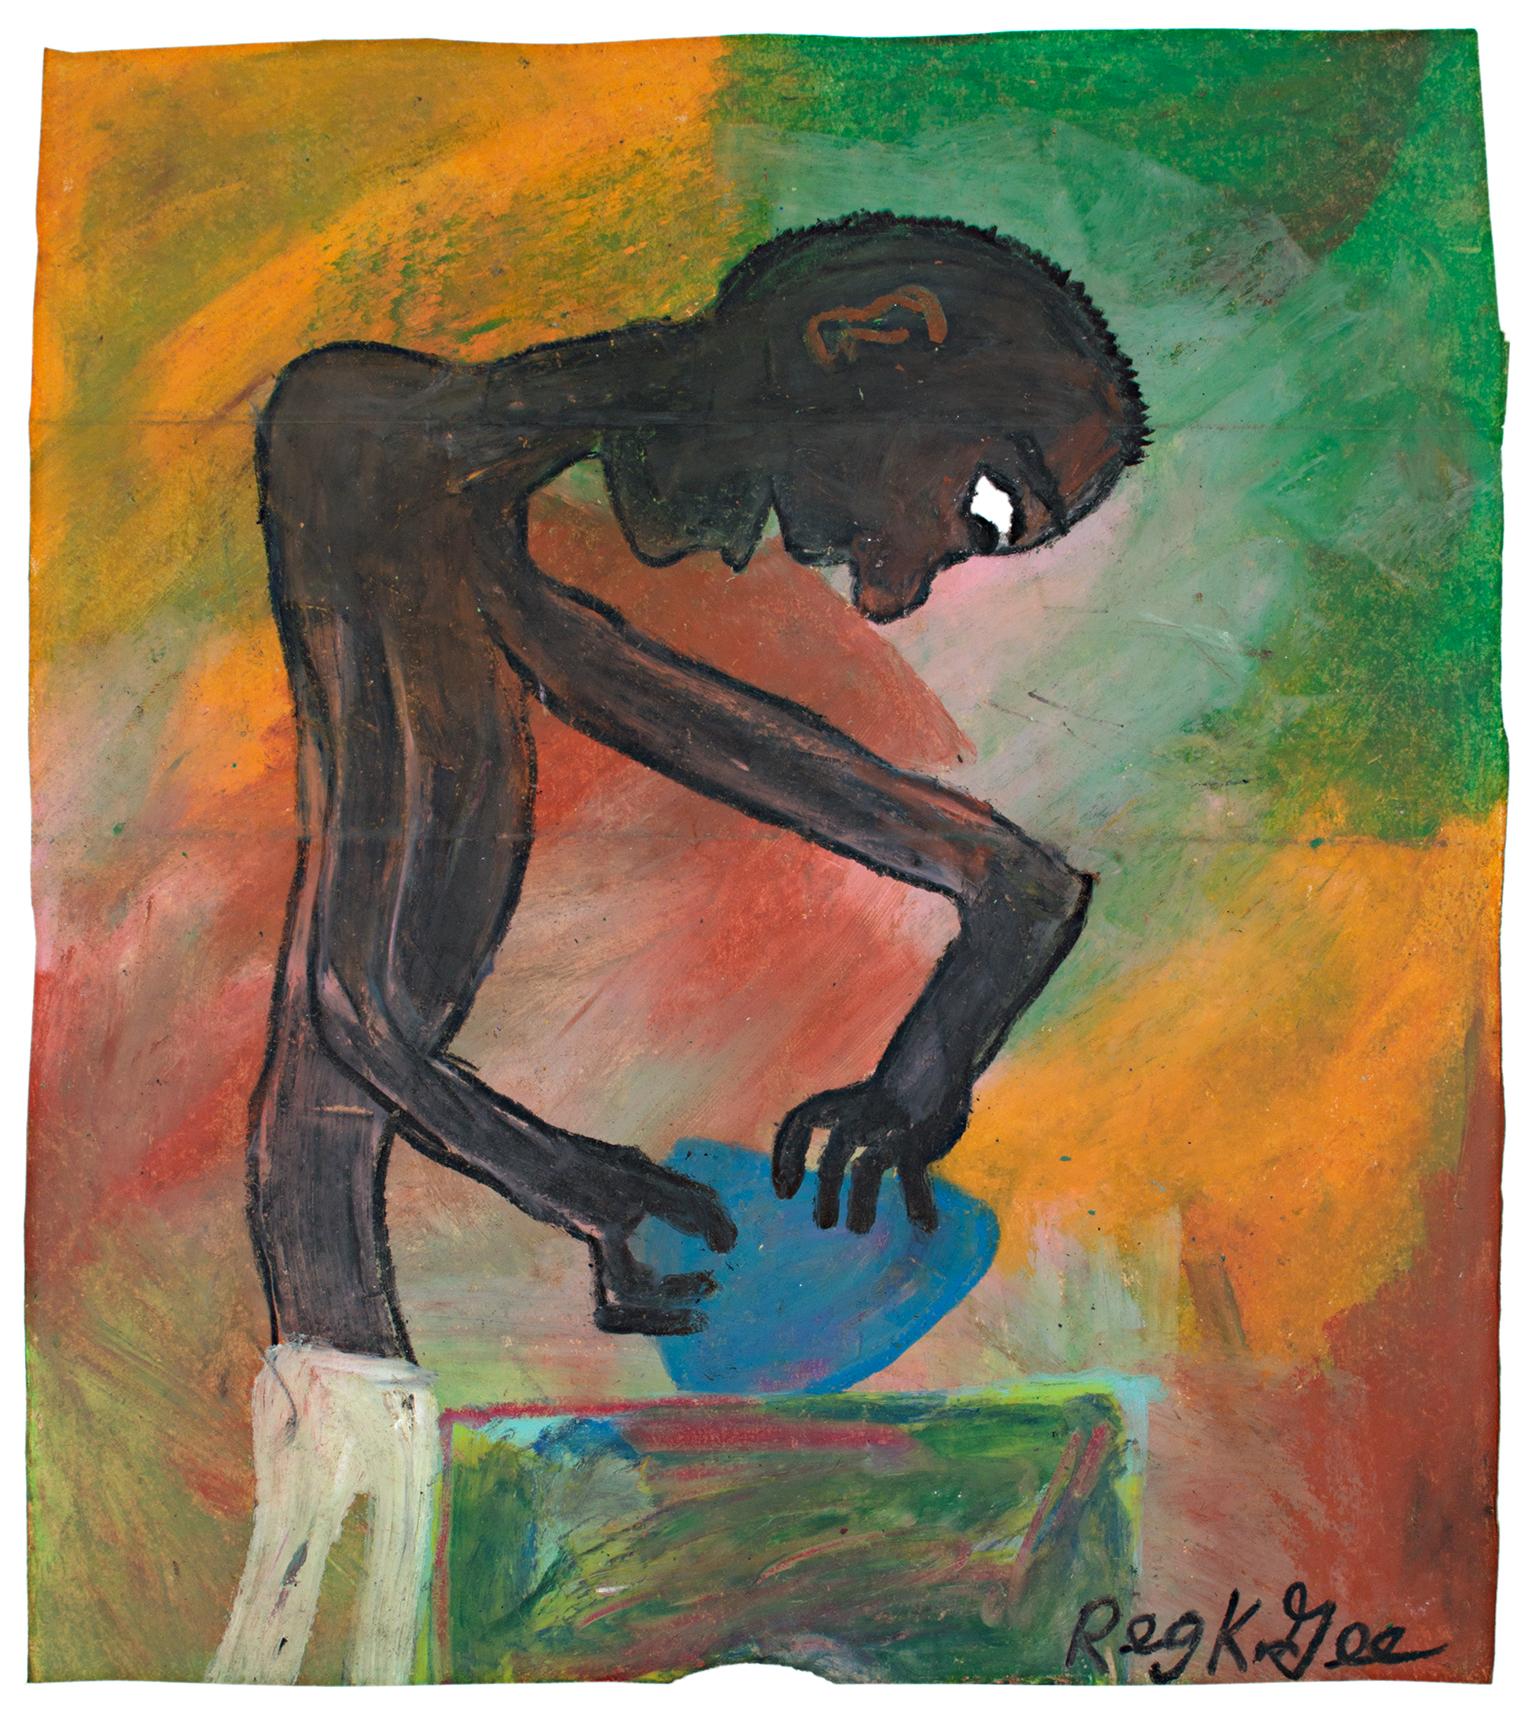 "Sculptor Begins" is an original oil pastel drawing on a Safeway grocery bag by Reginald K. Gee. The artist signed the piece lower right. This piece features a dark-skinned man beginning a sculpture with some blue clay. The background is green,